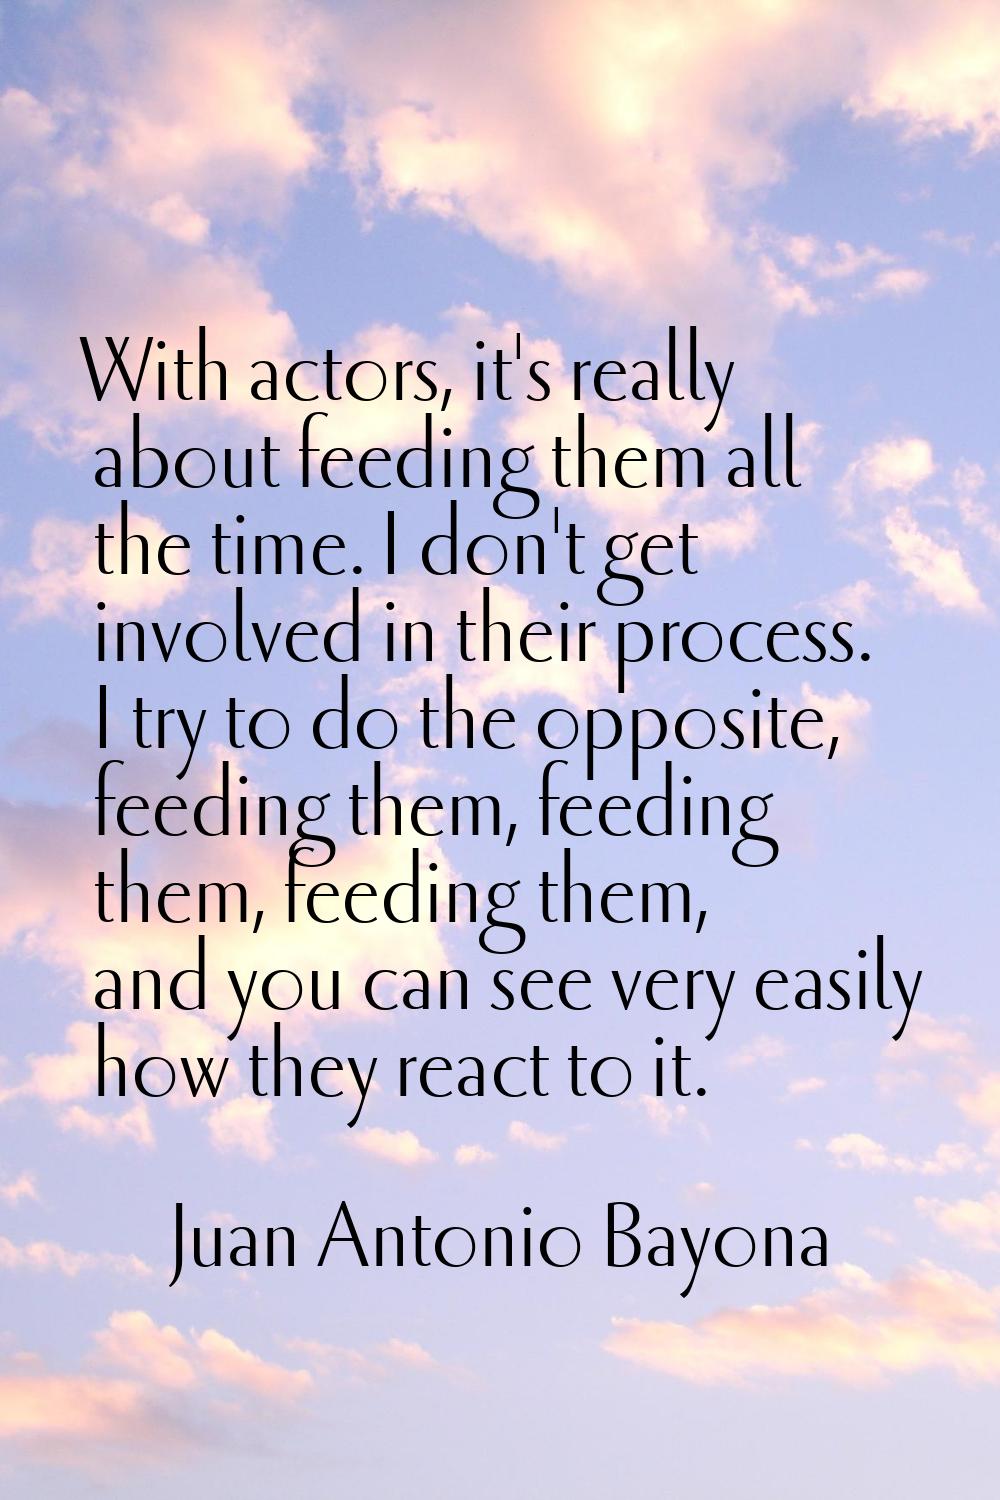 With actors, it's really about feeding them all the time. I don't get involved in their process. I 